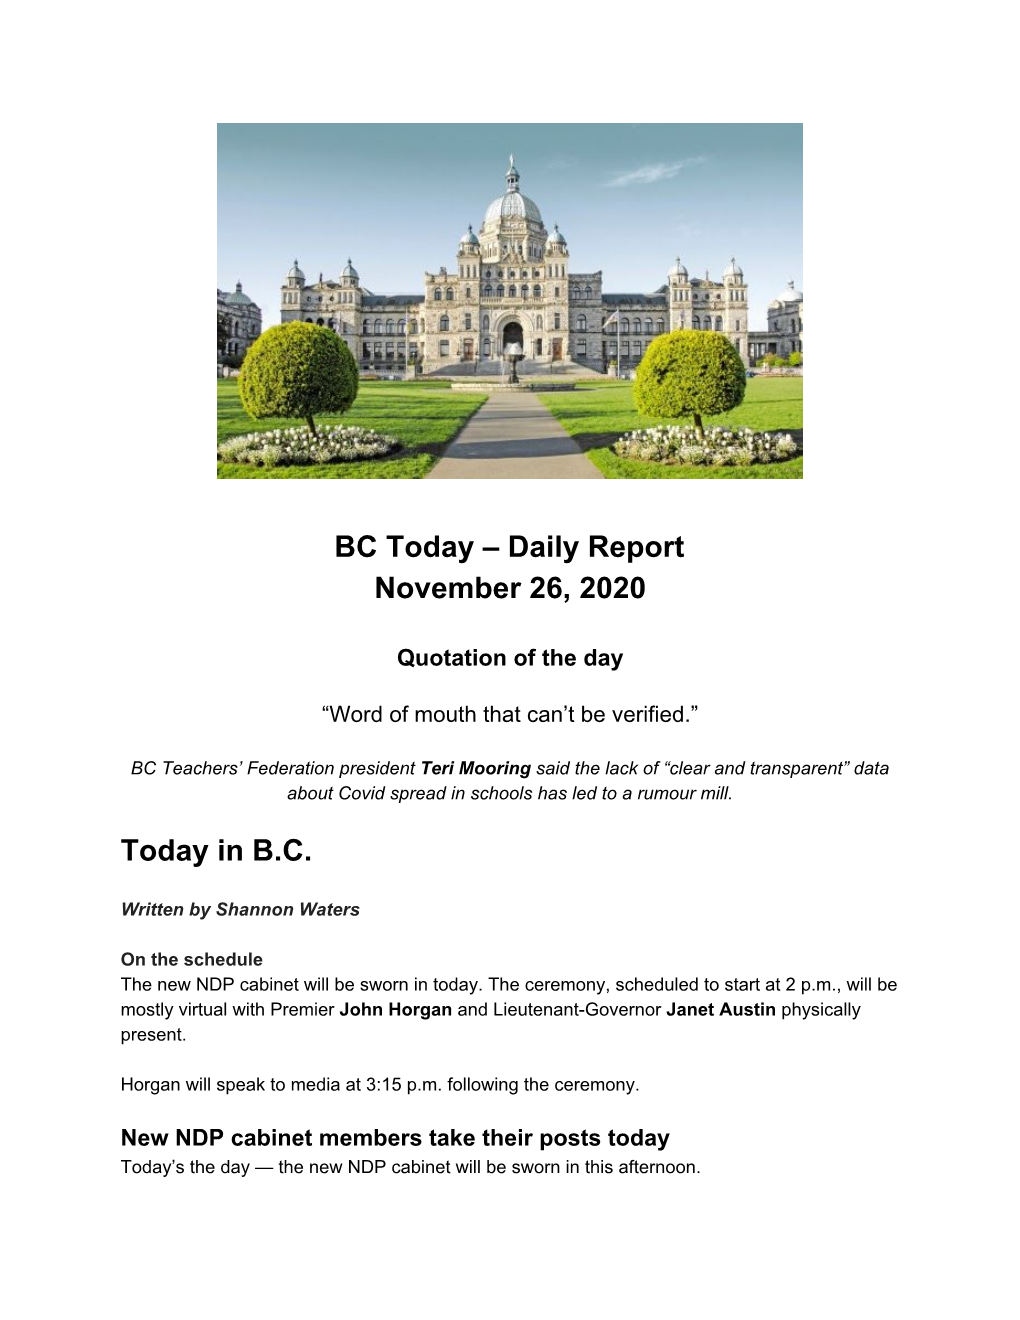 BC Today – Daily Report November 26, 2020 Today